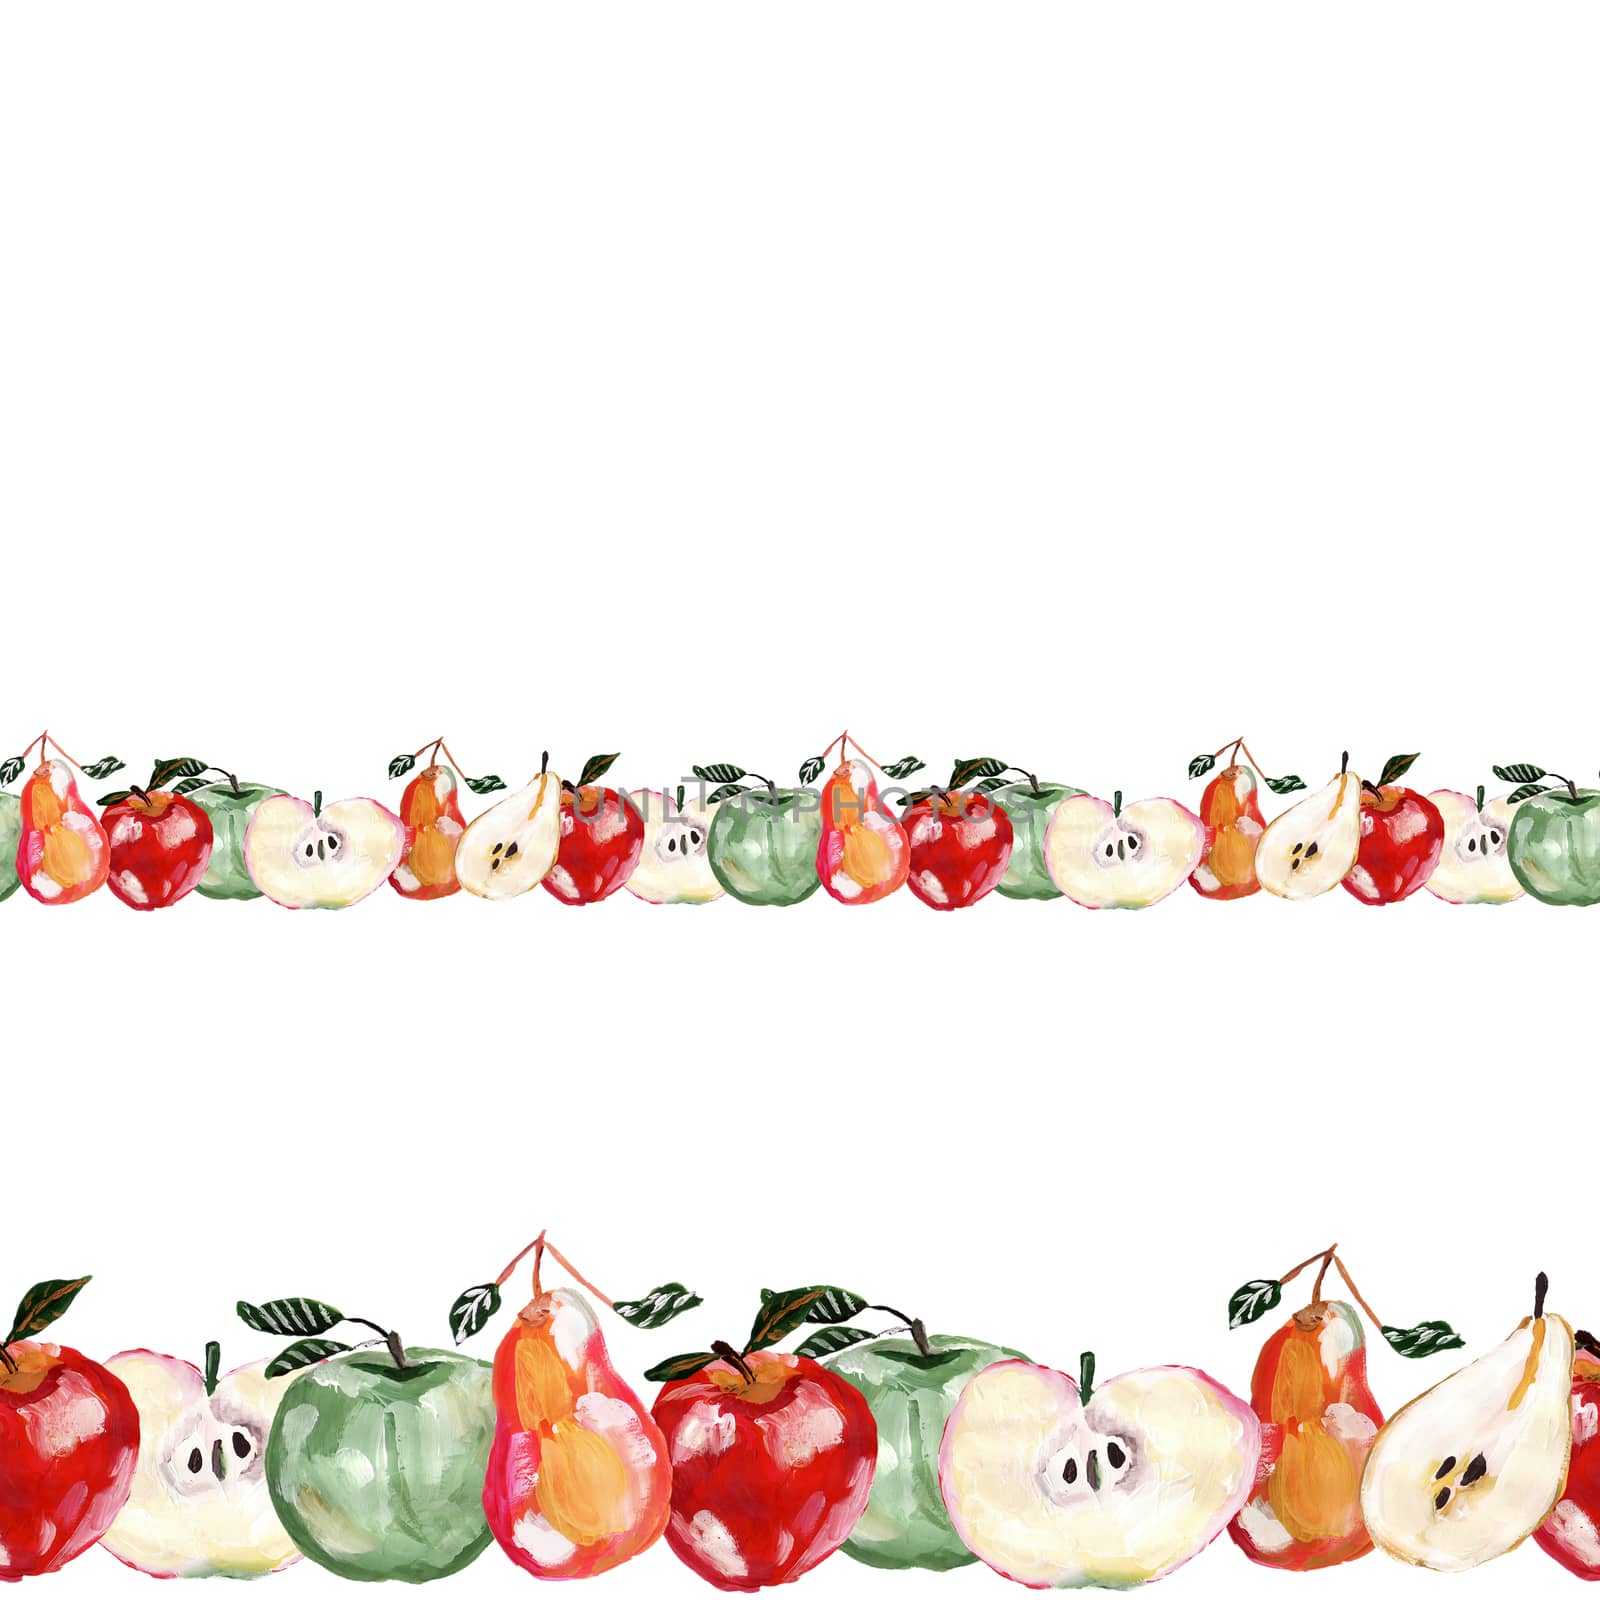 Repeat horizontal border design with hand drawn apples and pears on white background. Repeated apple and pear decor design, fabric, print, textile, textile, wallpaper, posters.